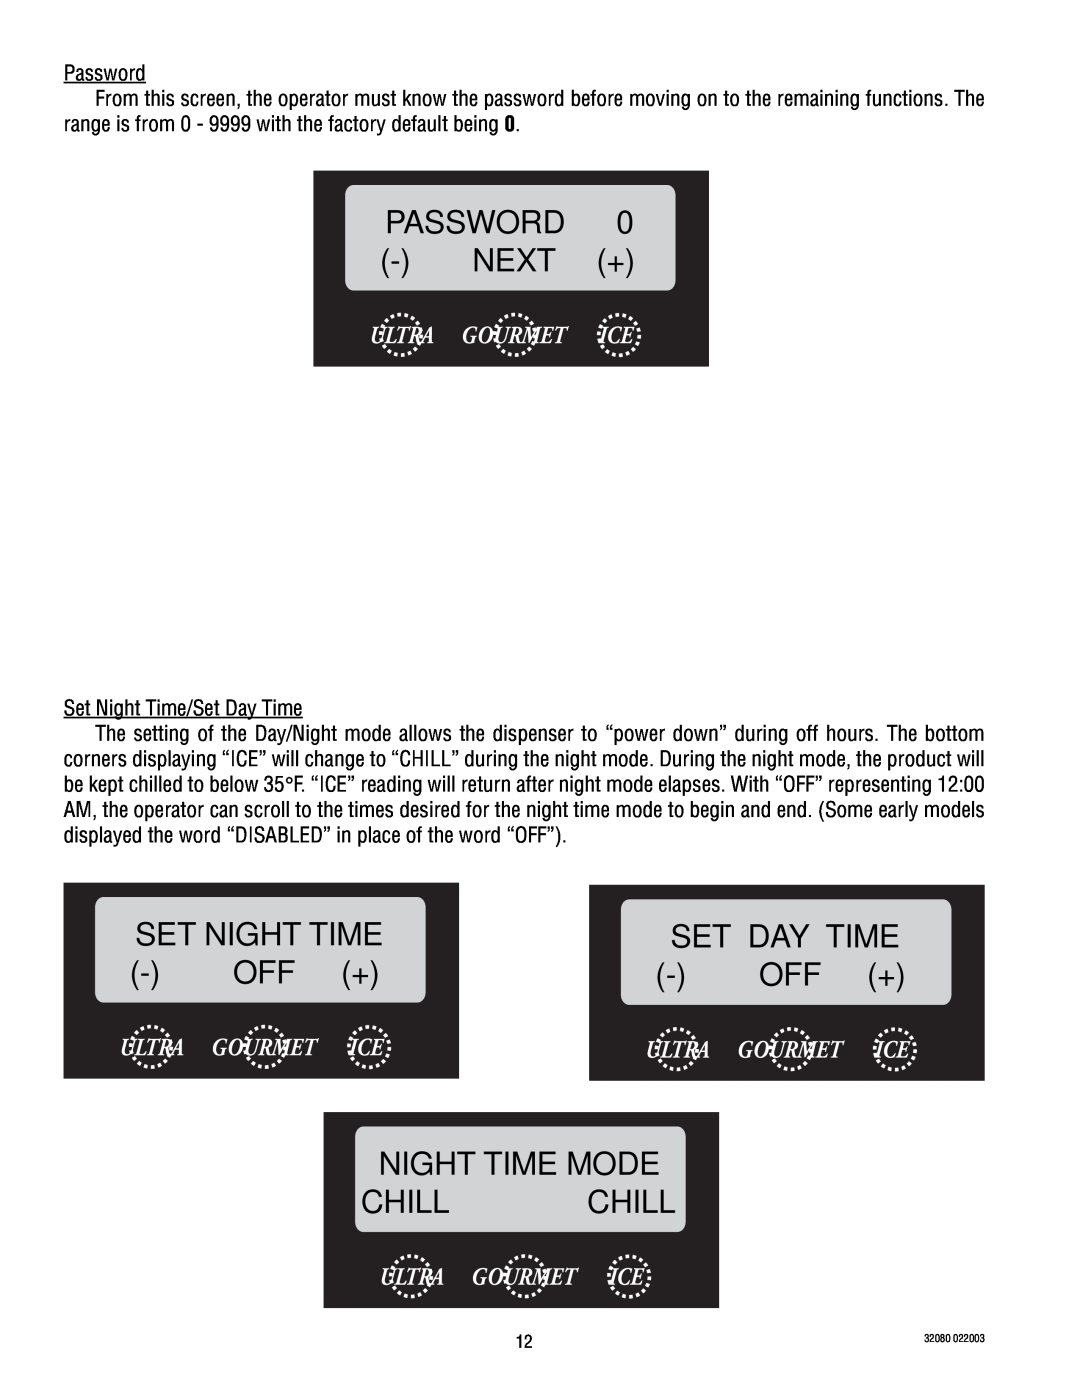 Bunn ULTRA-2 manual PASSWORD 0 - NEXT +, Set Night Time, Set Day Time, Off +, Night Time Mode Chill Chill 